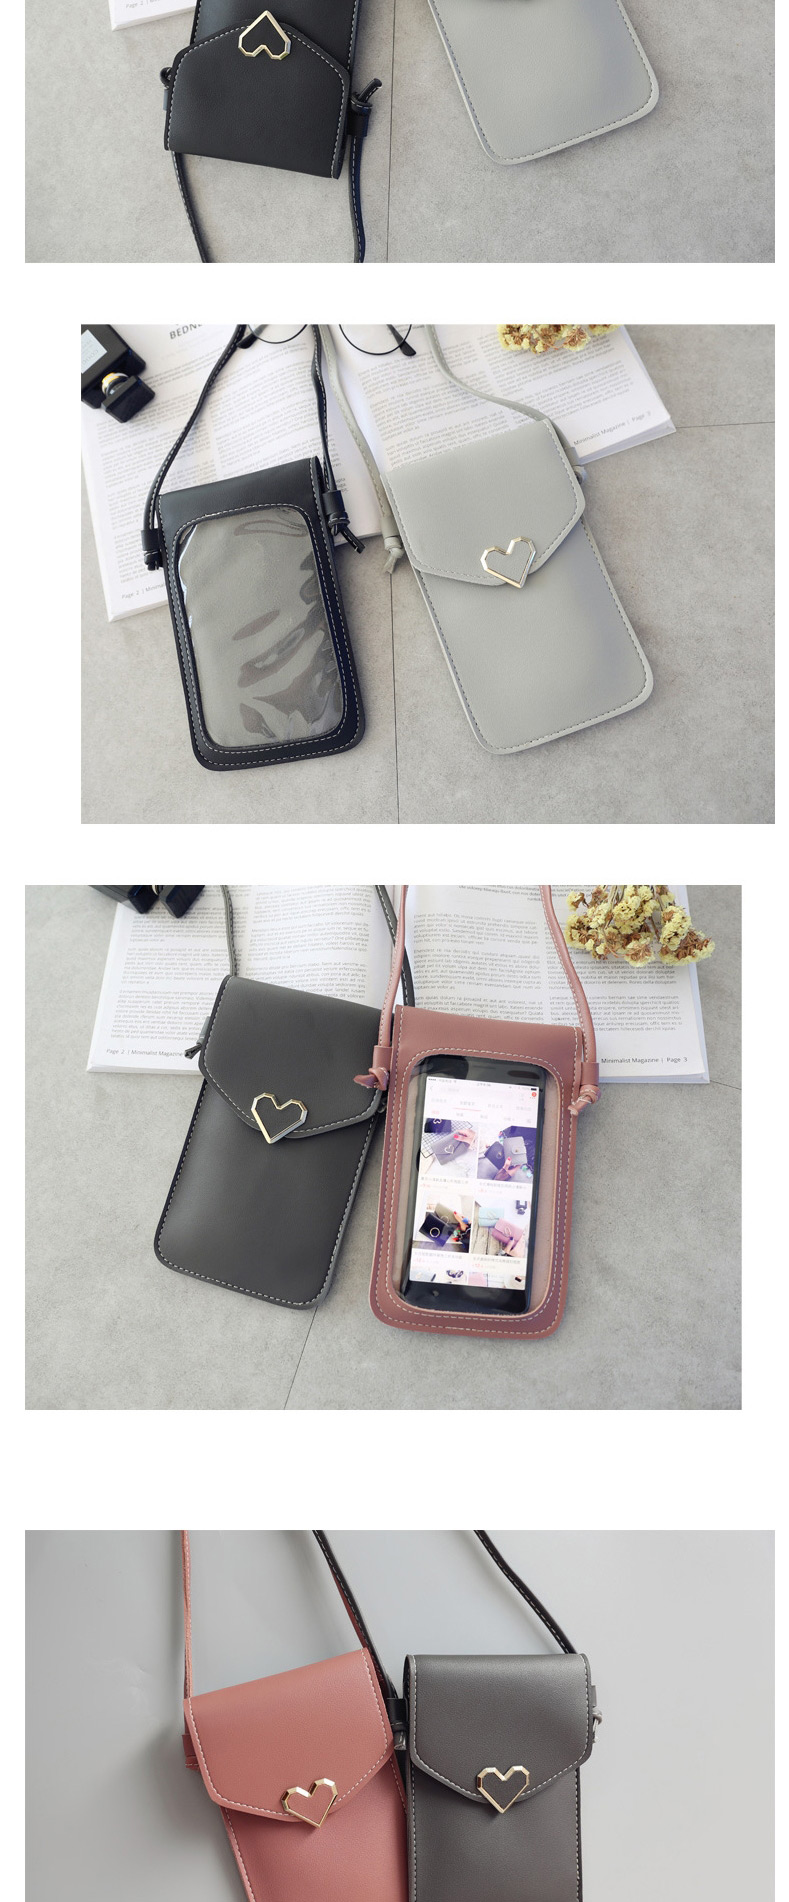 Fashion Gray-blue Caring Metal Transparent Touch Screen Multifunctional Mobile Phone Bag,Shoulder bags